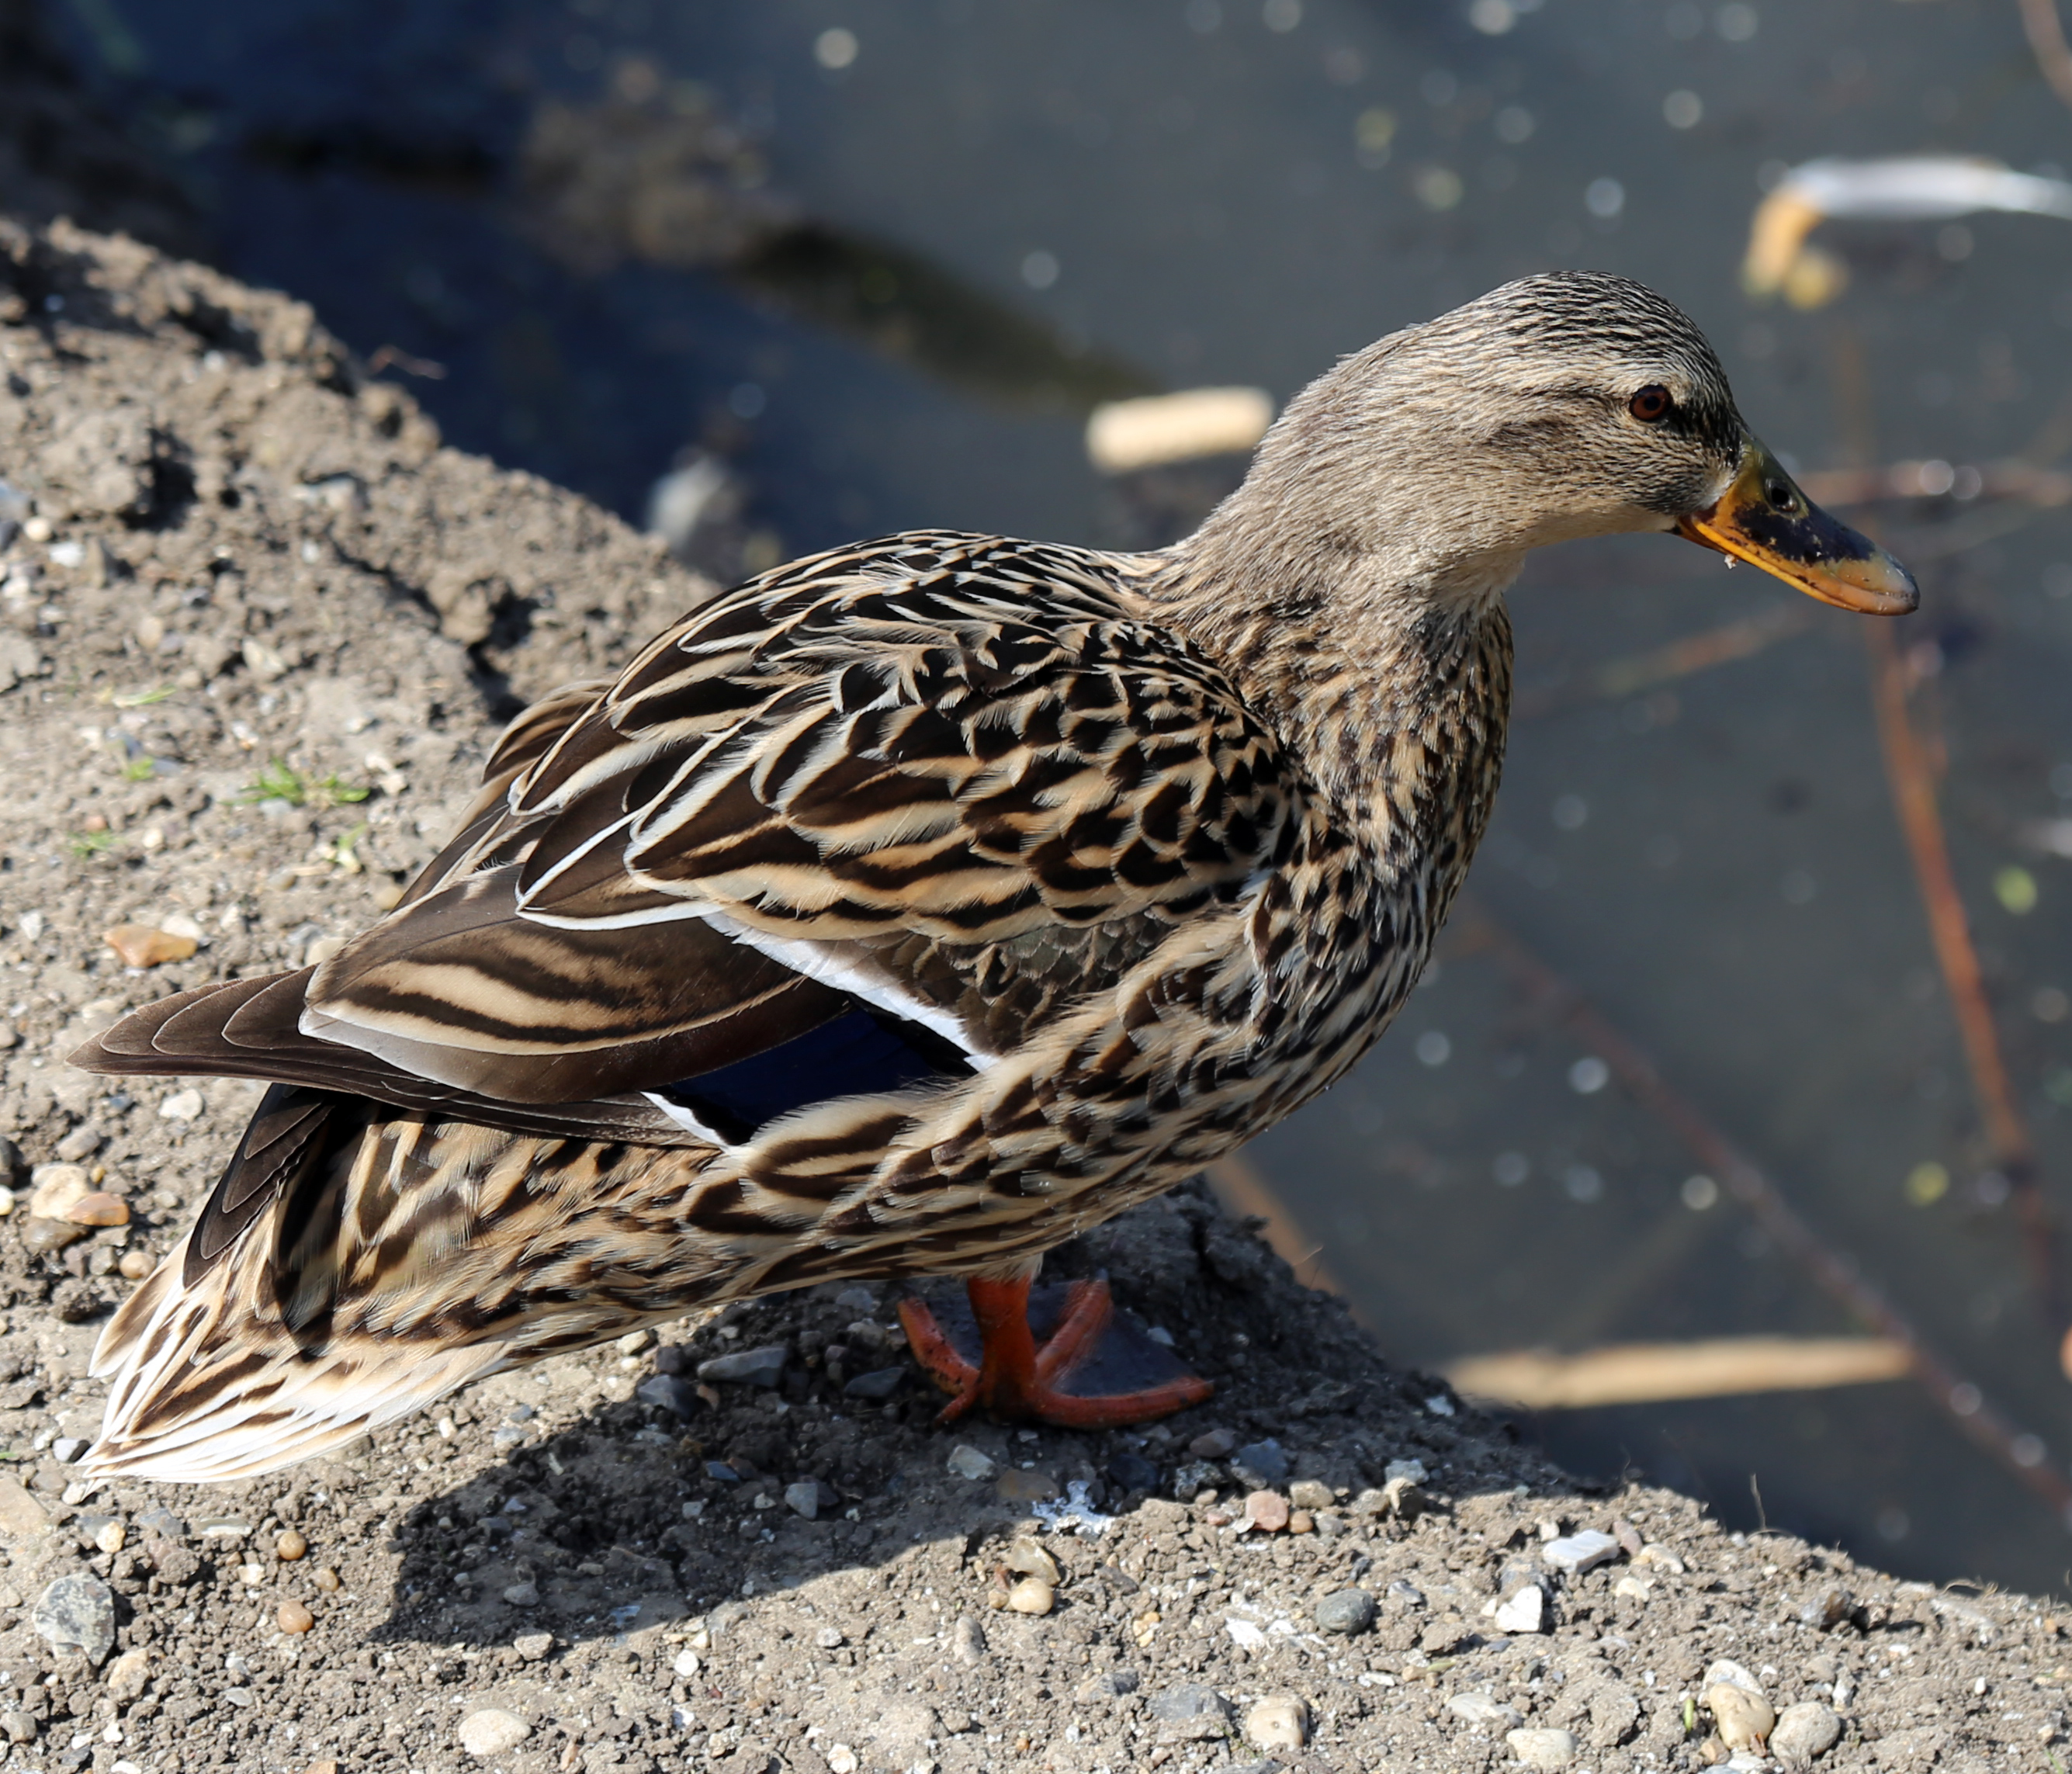 A duck at Fishers Green, Lee Valley, Waltham Abbey, Essex, England 01